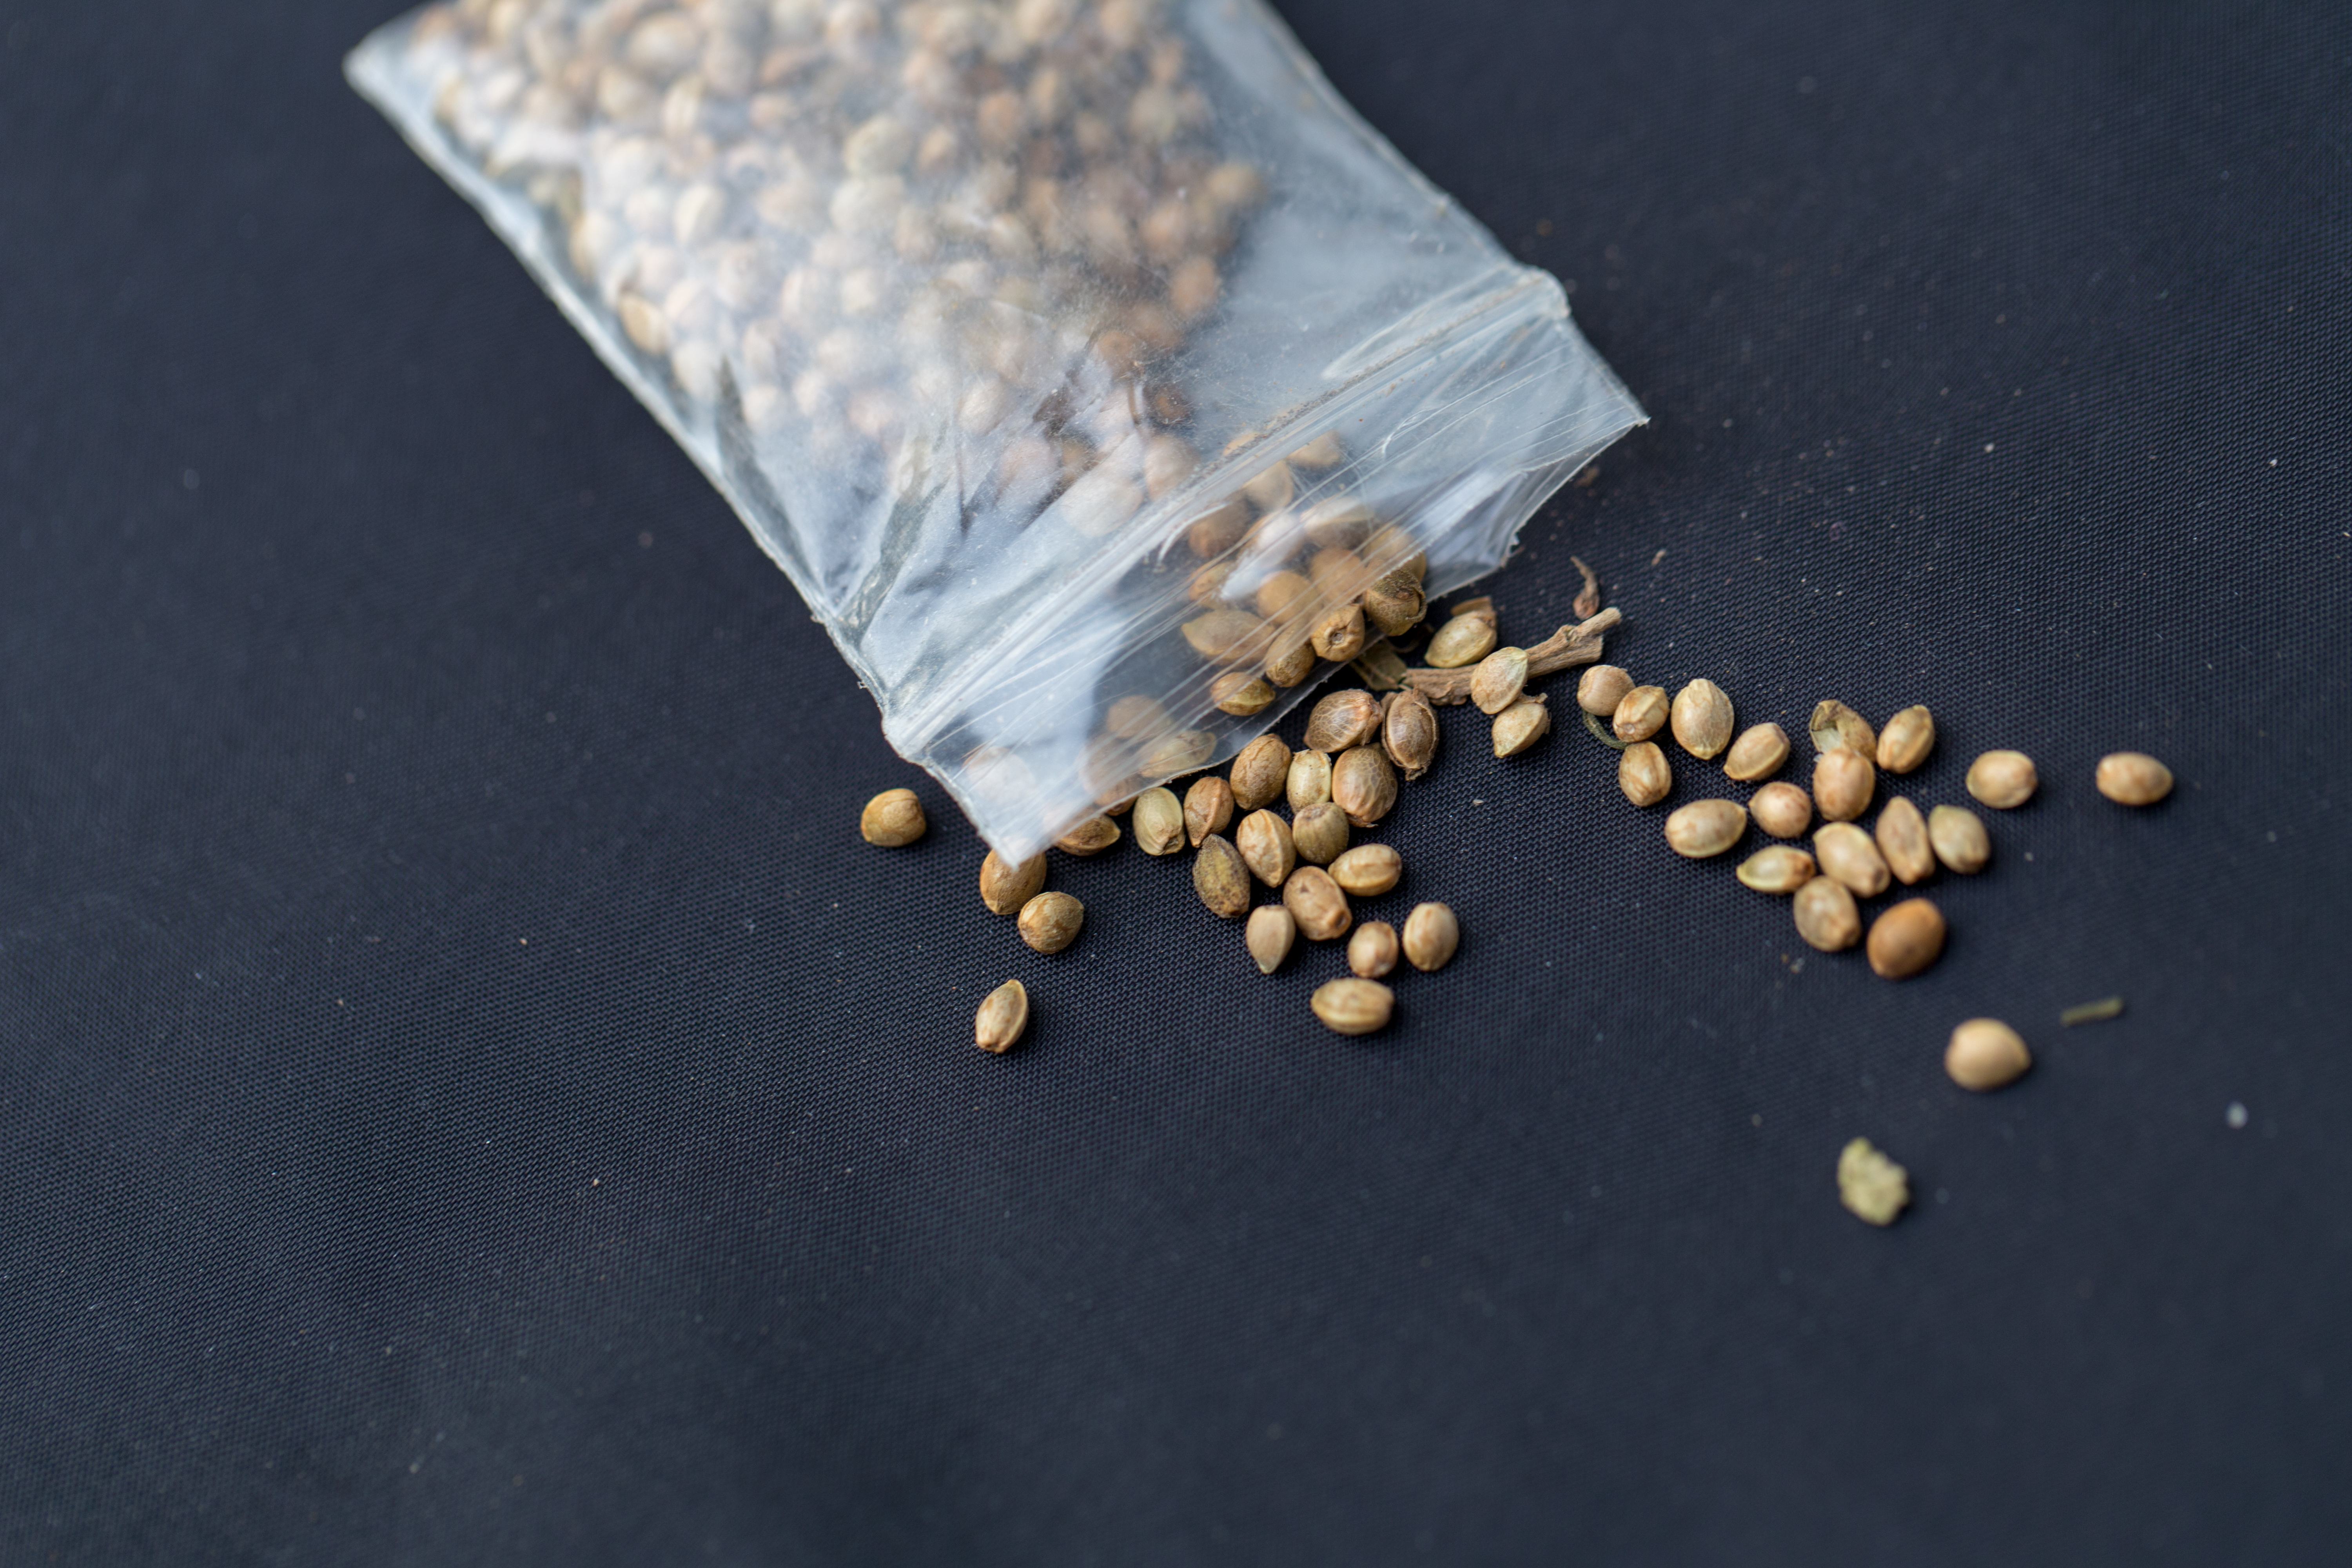 How to Select Quality Cannabis Seeds